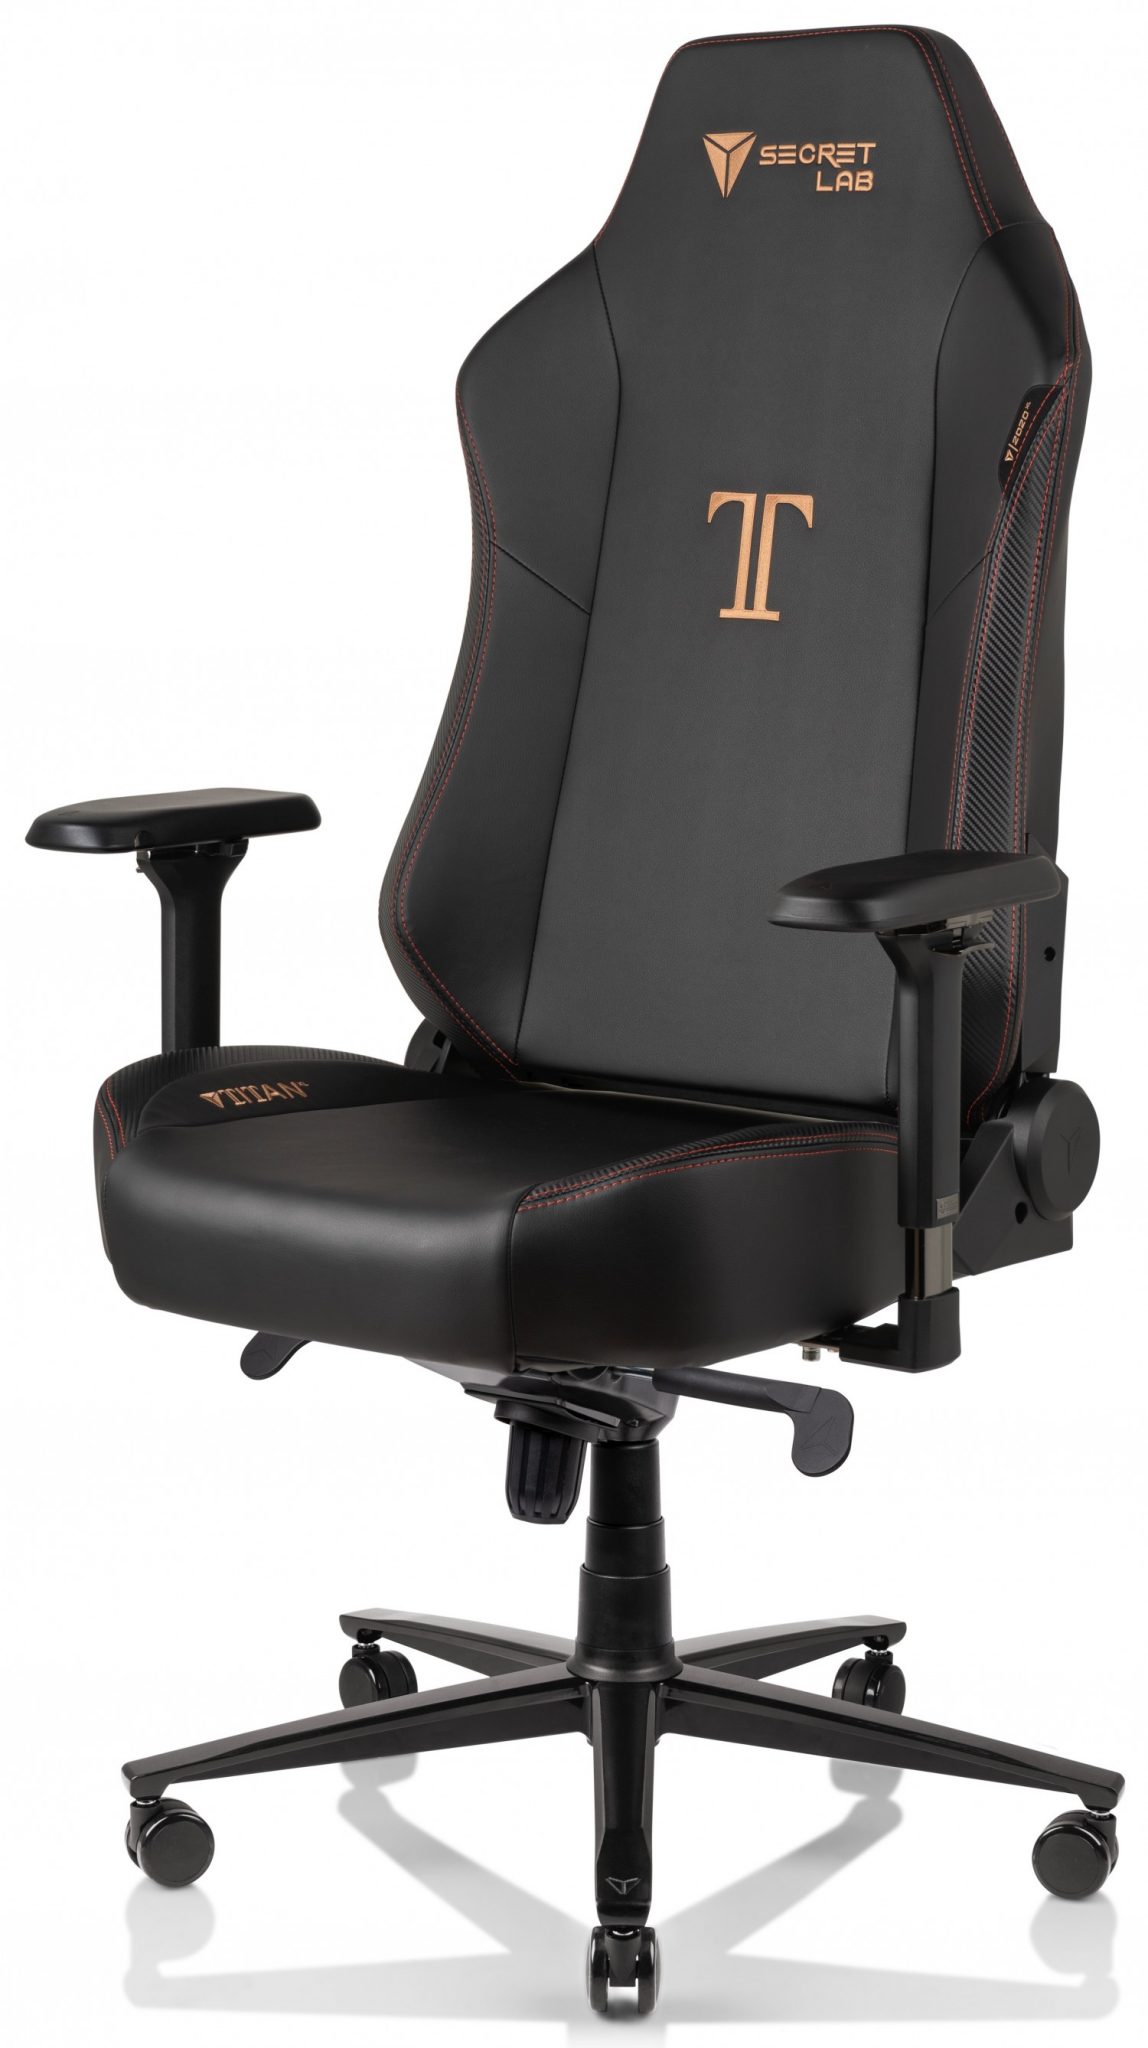 Gaming Chairs Get A Whole Lot Bigger With The Secretlab Titan Xl Geek